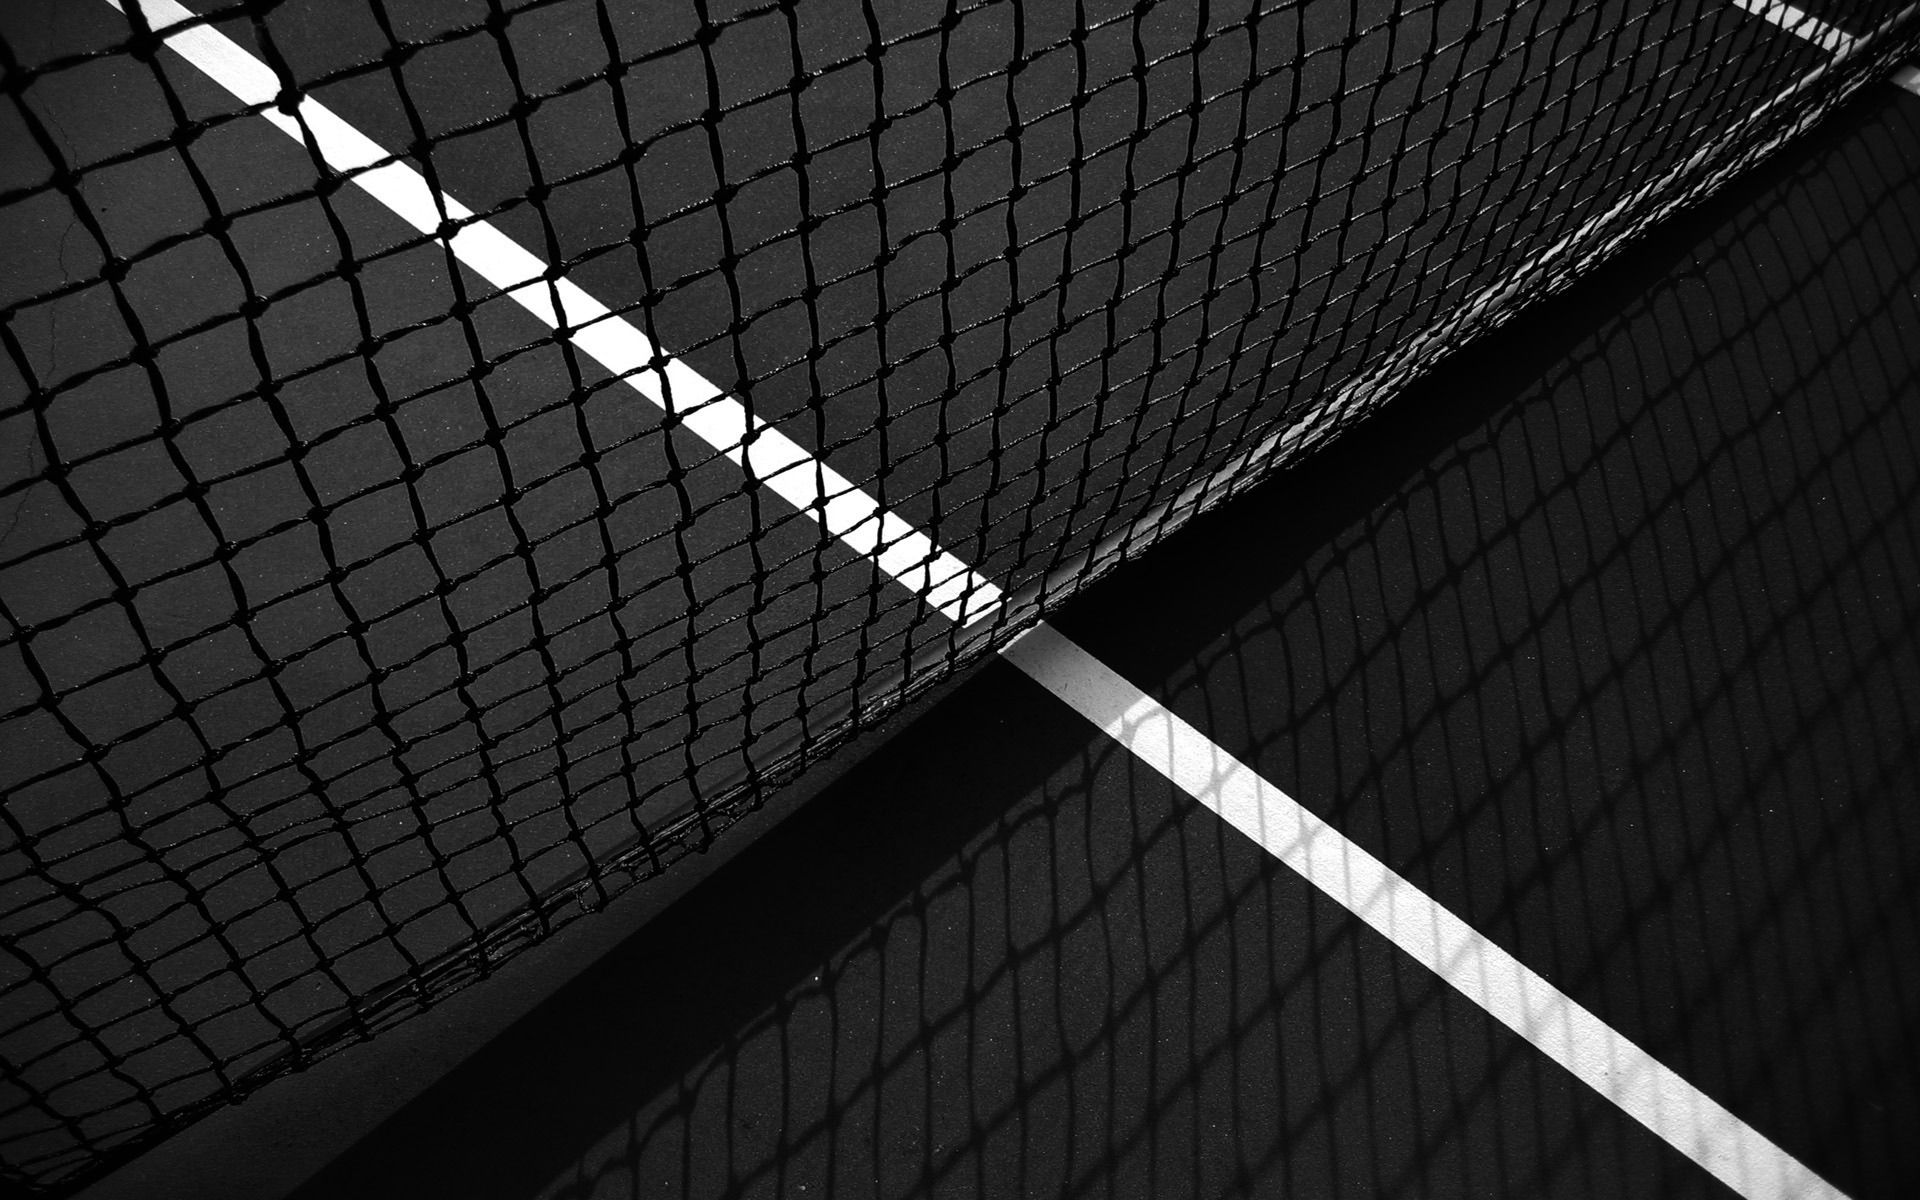 tennis, sports, grid, shadow, line, court wallpaper for mobile